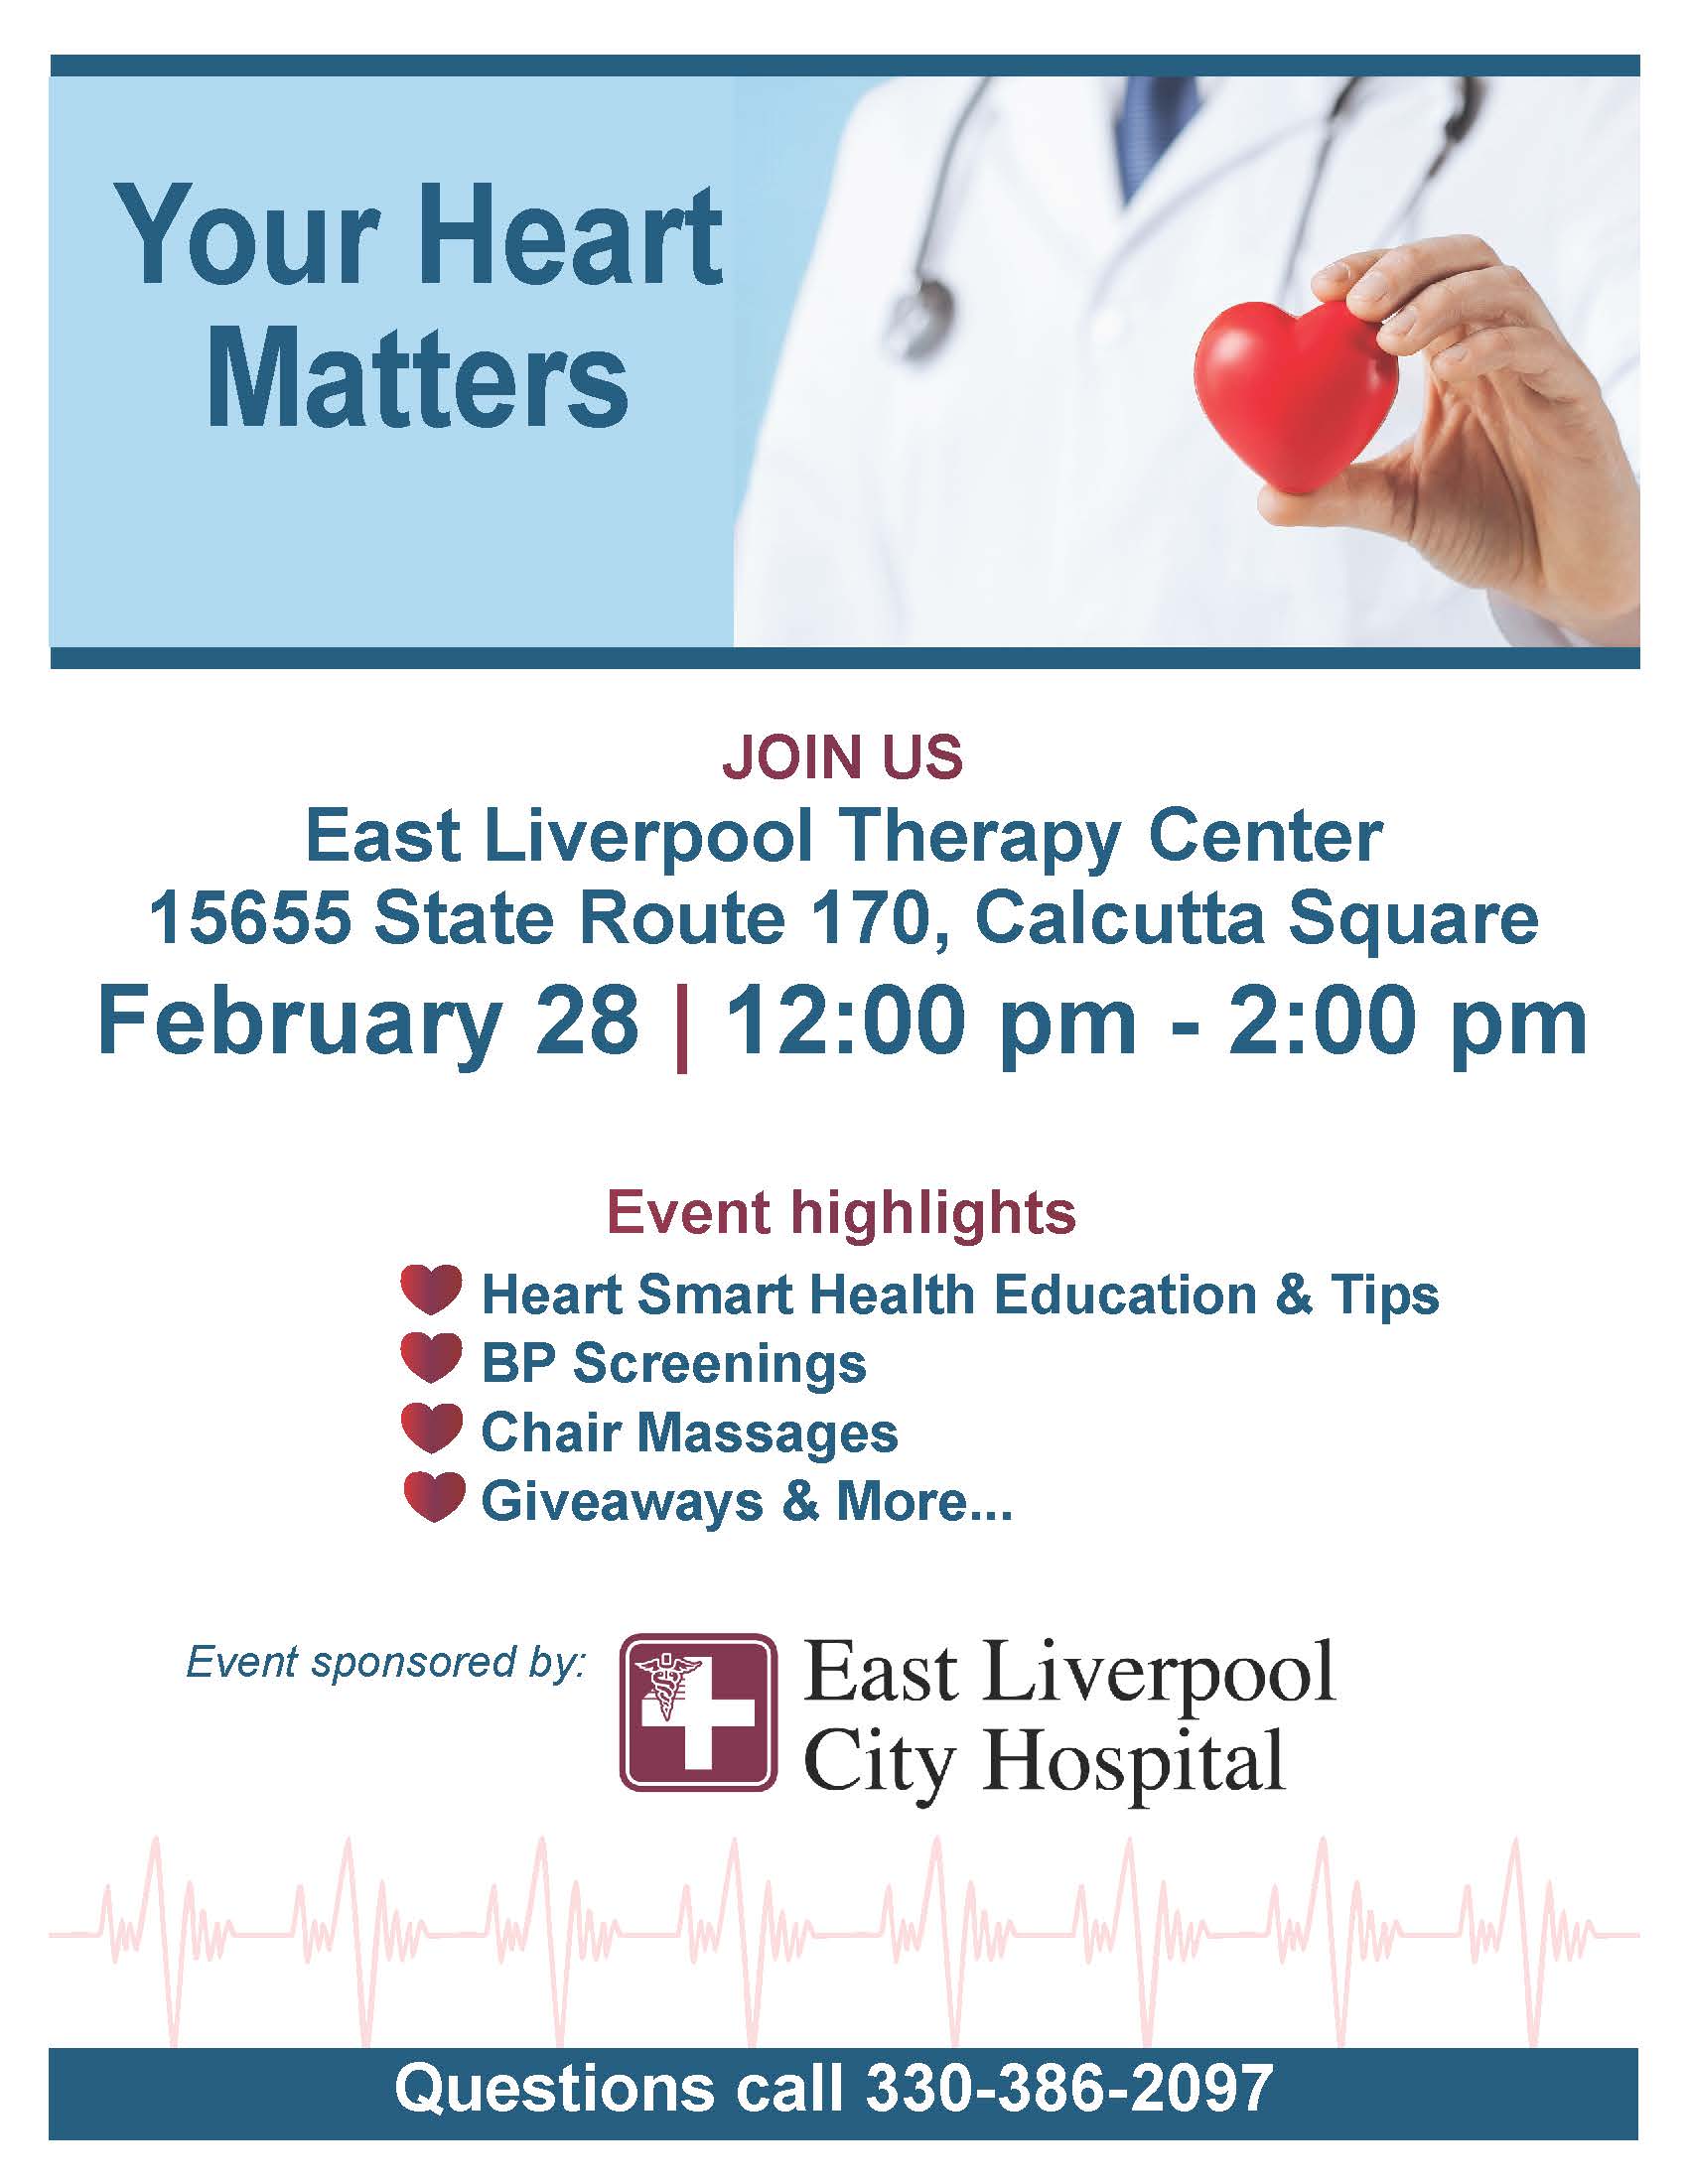 Your Heart Matters Events